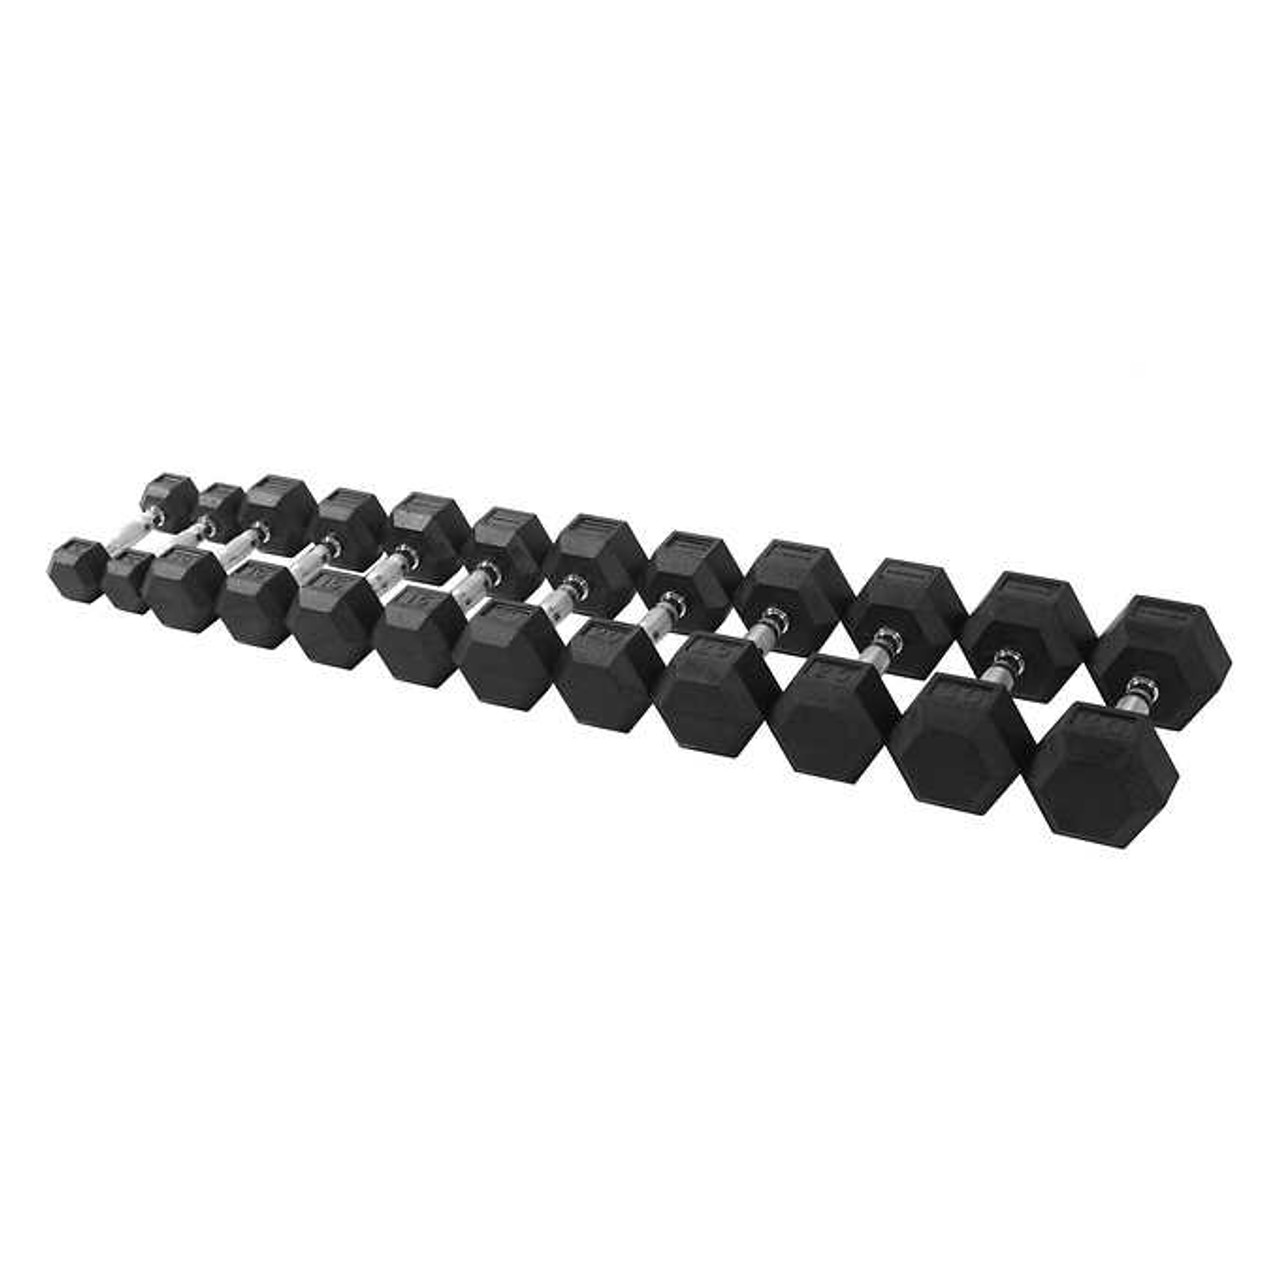 Inspire Fitness 95.2 kg (210 lb.) Dumbbell Set with Stand - Chicken Pieces